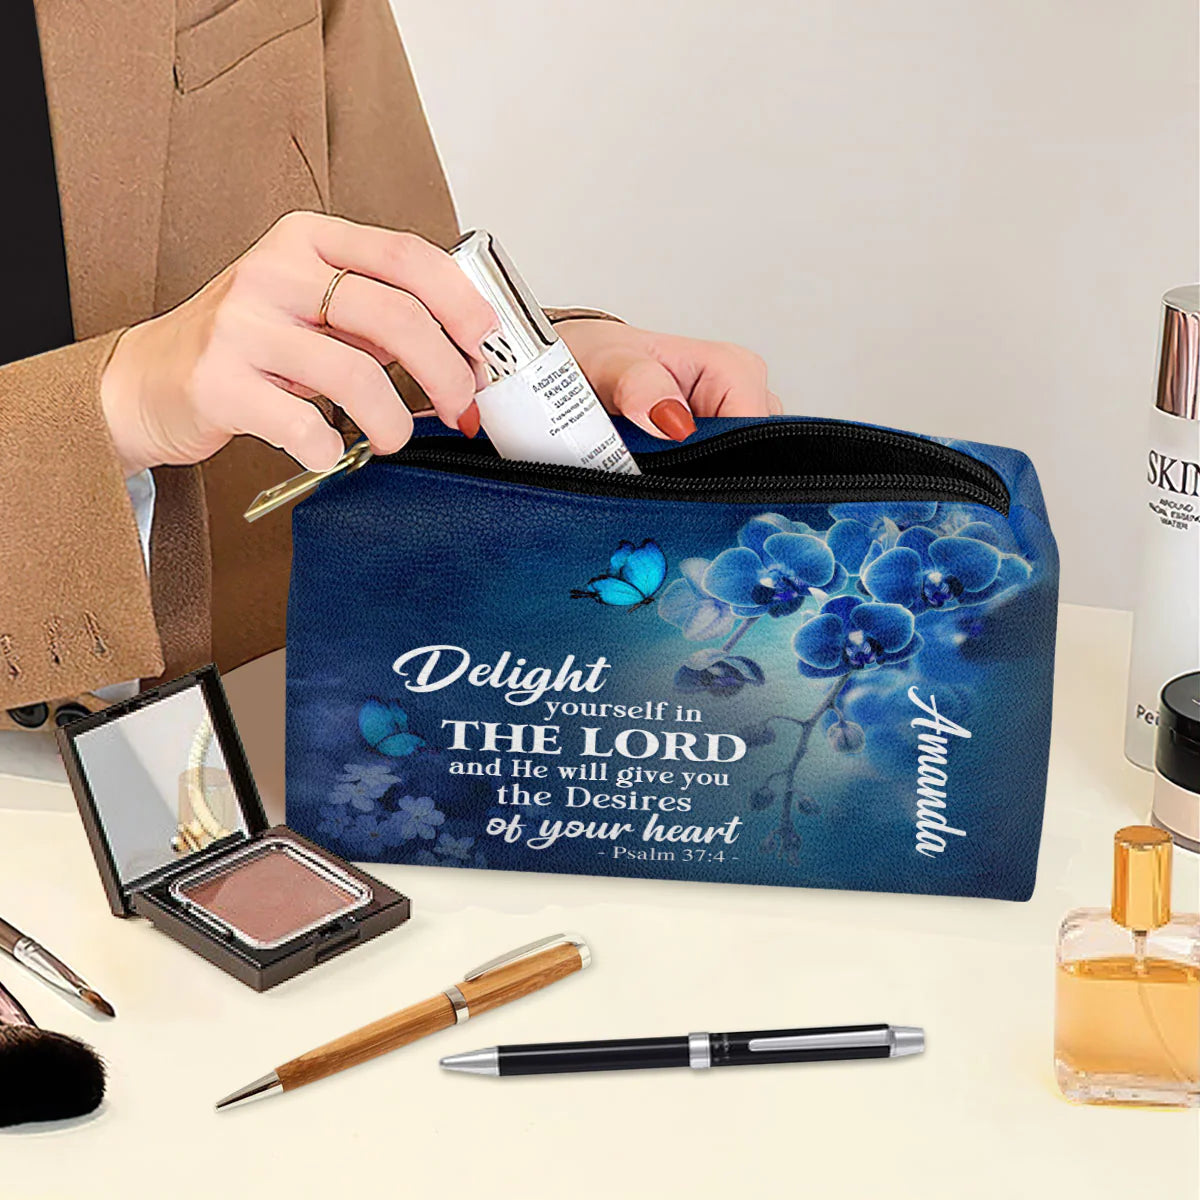 Christianartbag Makeup Cosmetic Bag, Delight Yourself In The Lord Psalm 37:4, Christmas Gift, Personalized Leather Cosmetic Bag. - Christian Art Bag